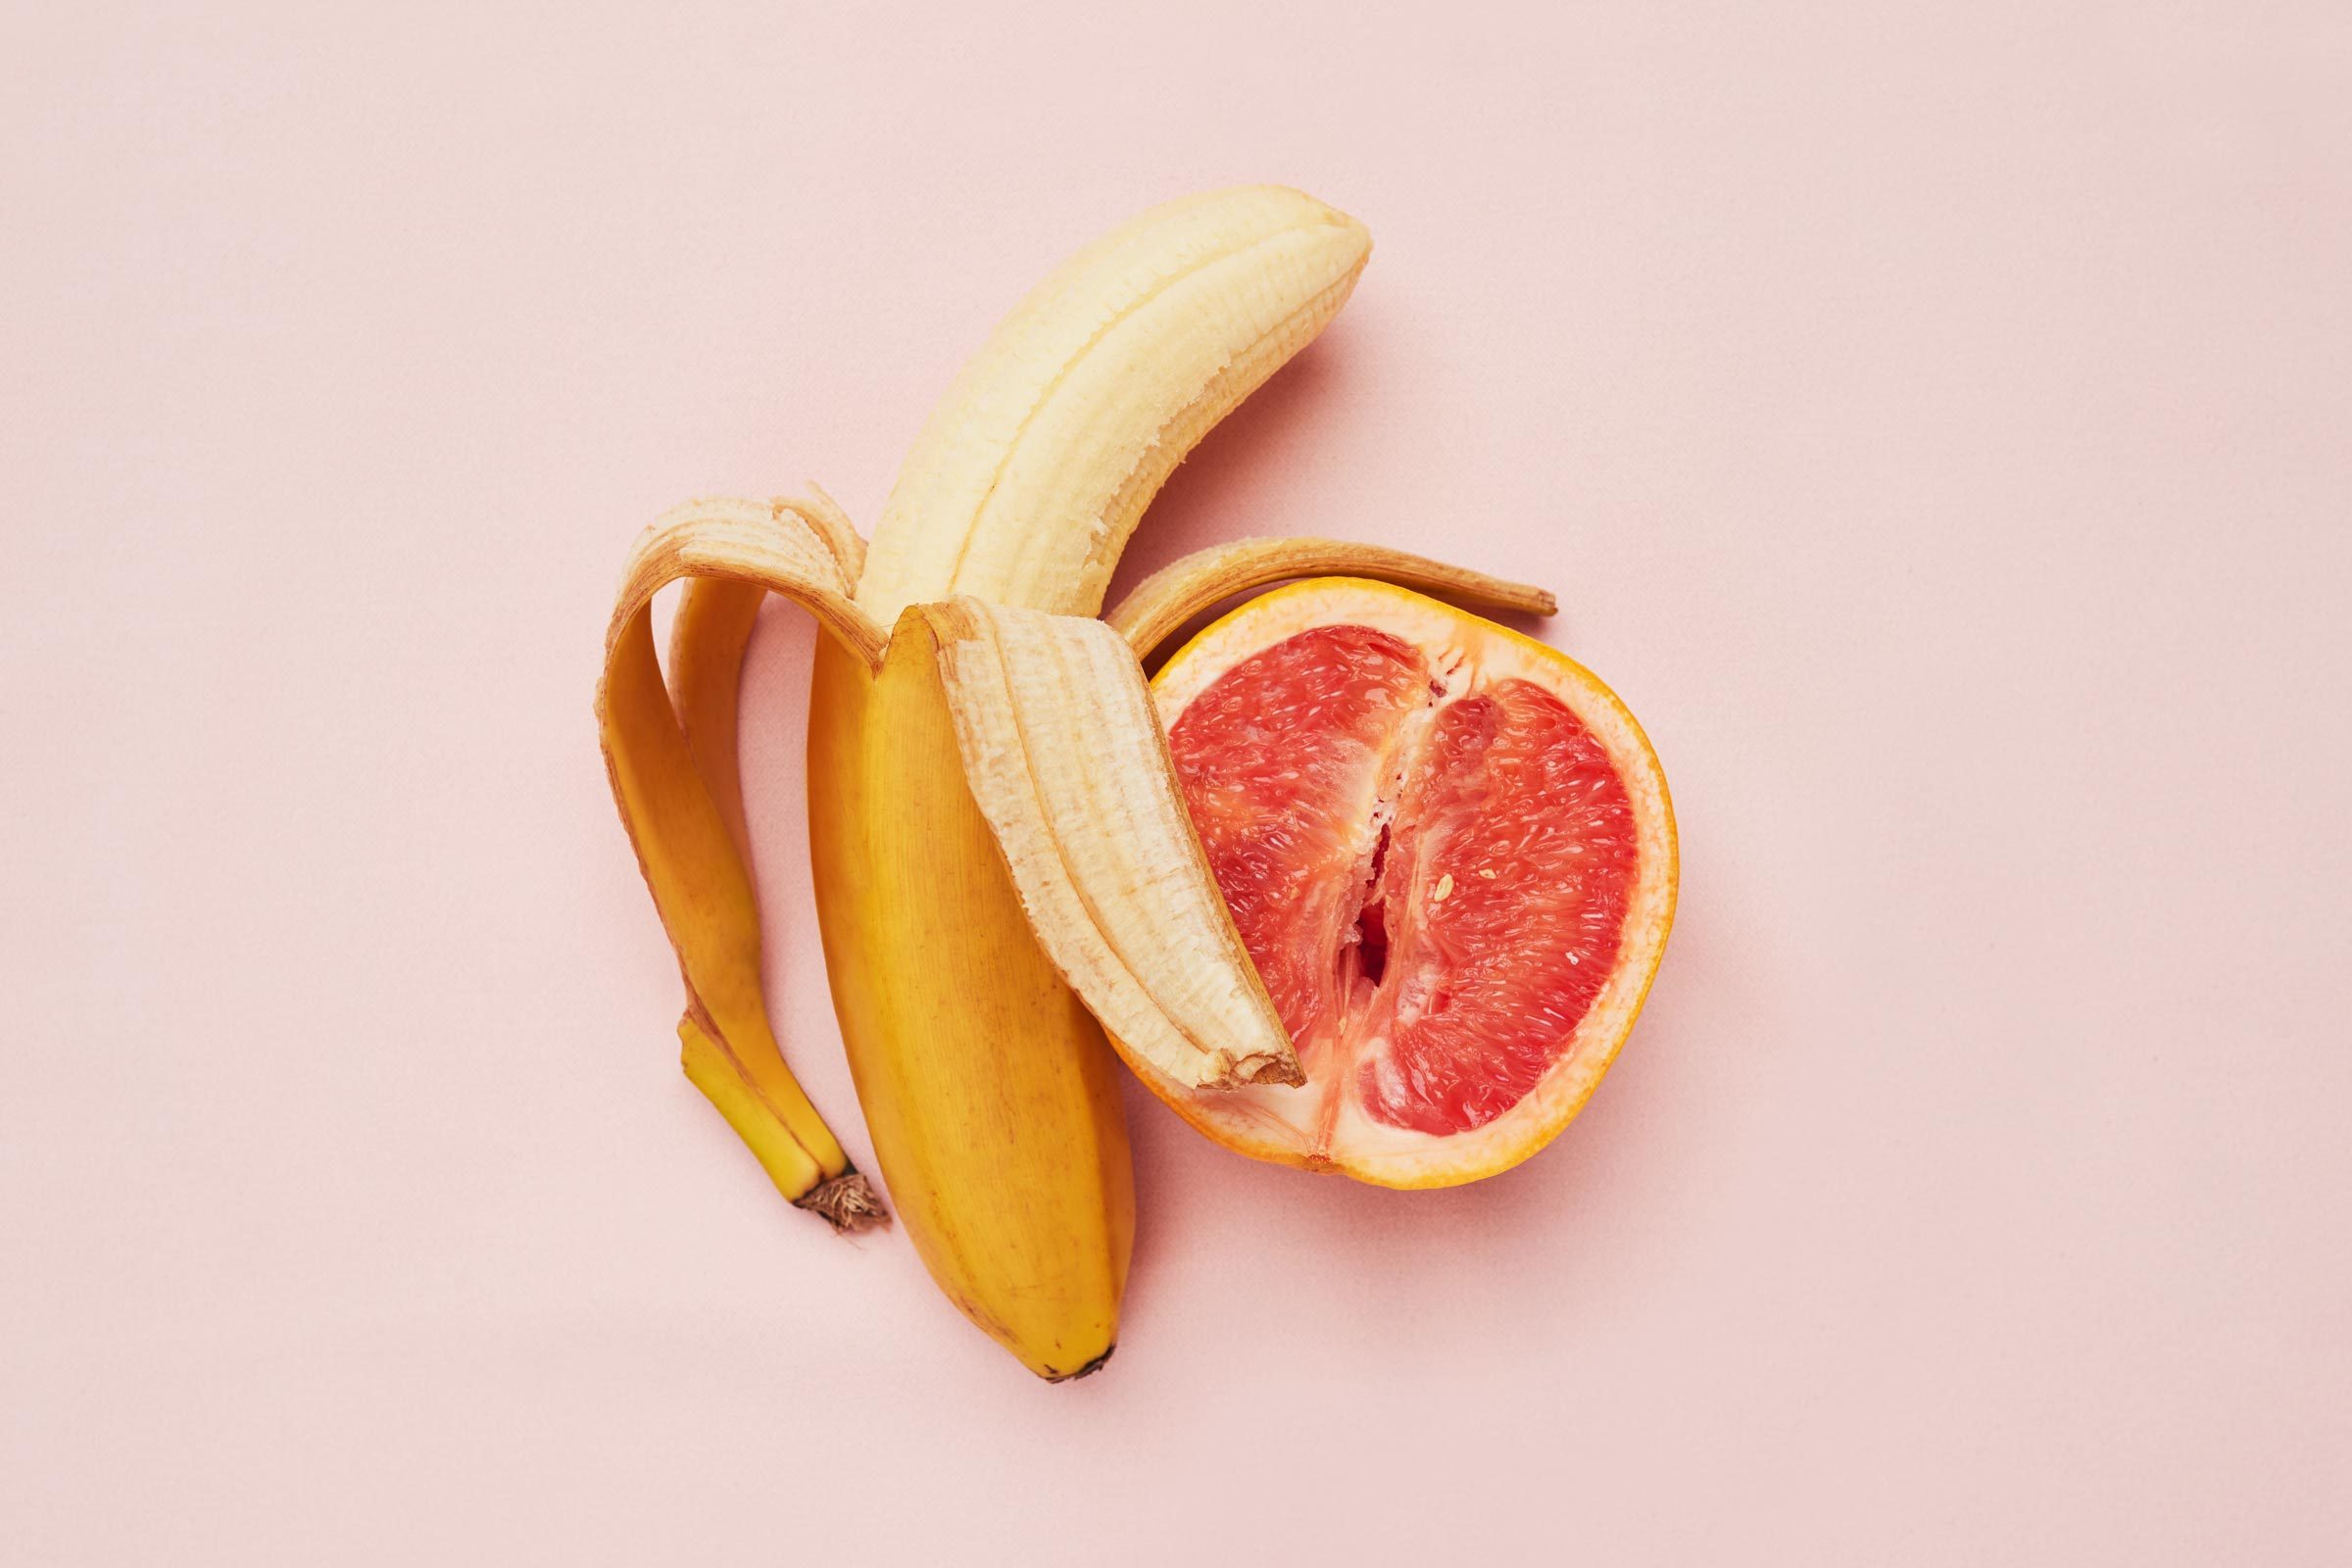 Studio shot of a banana and grapefruit in a suggestive position against a pink background